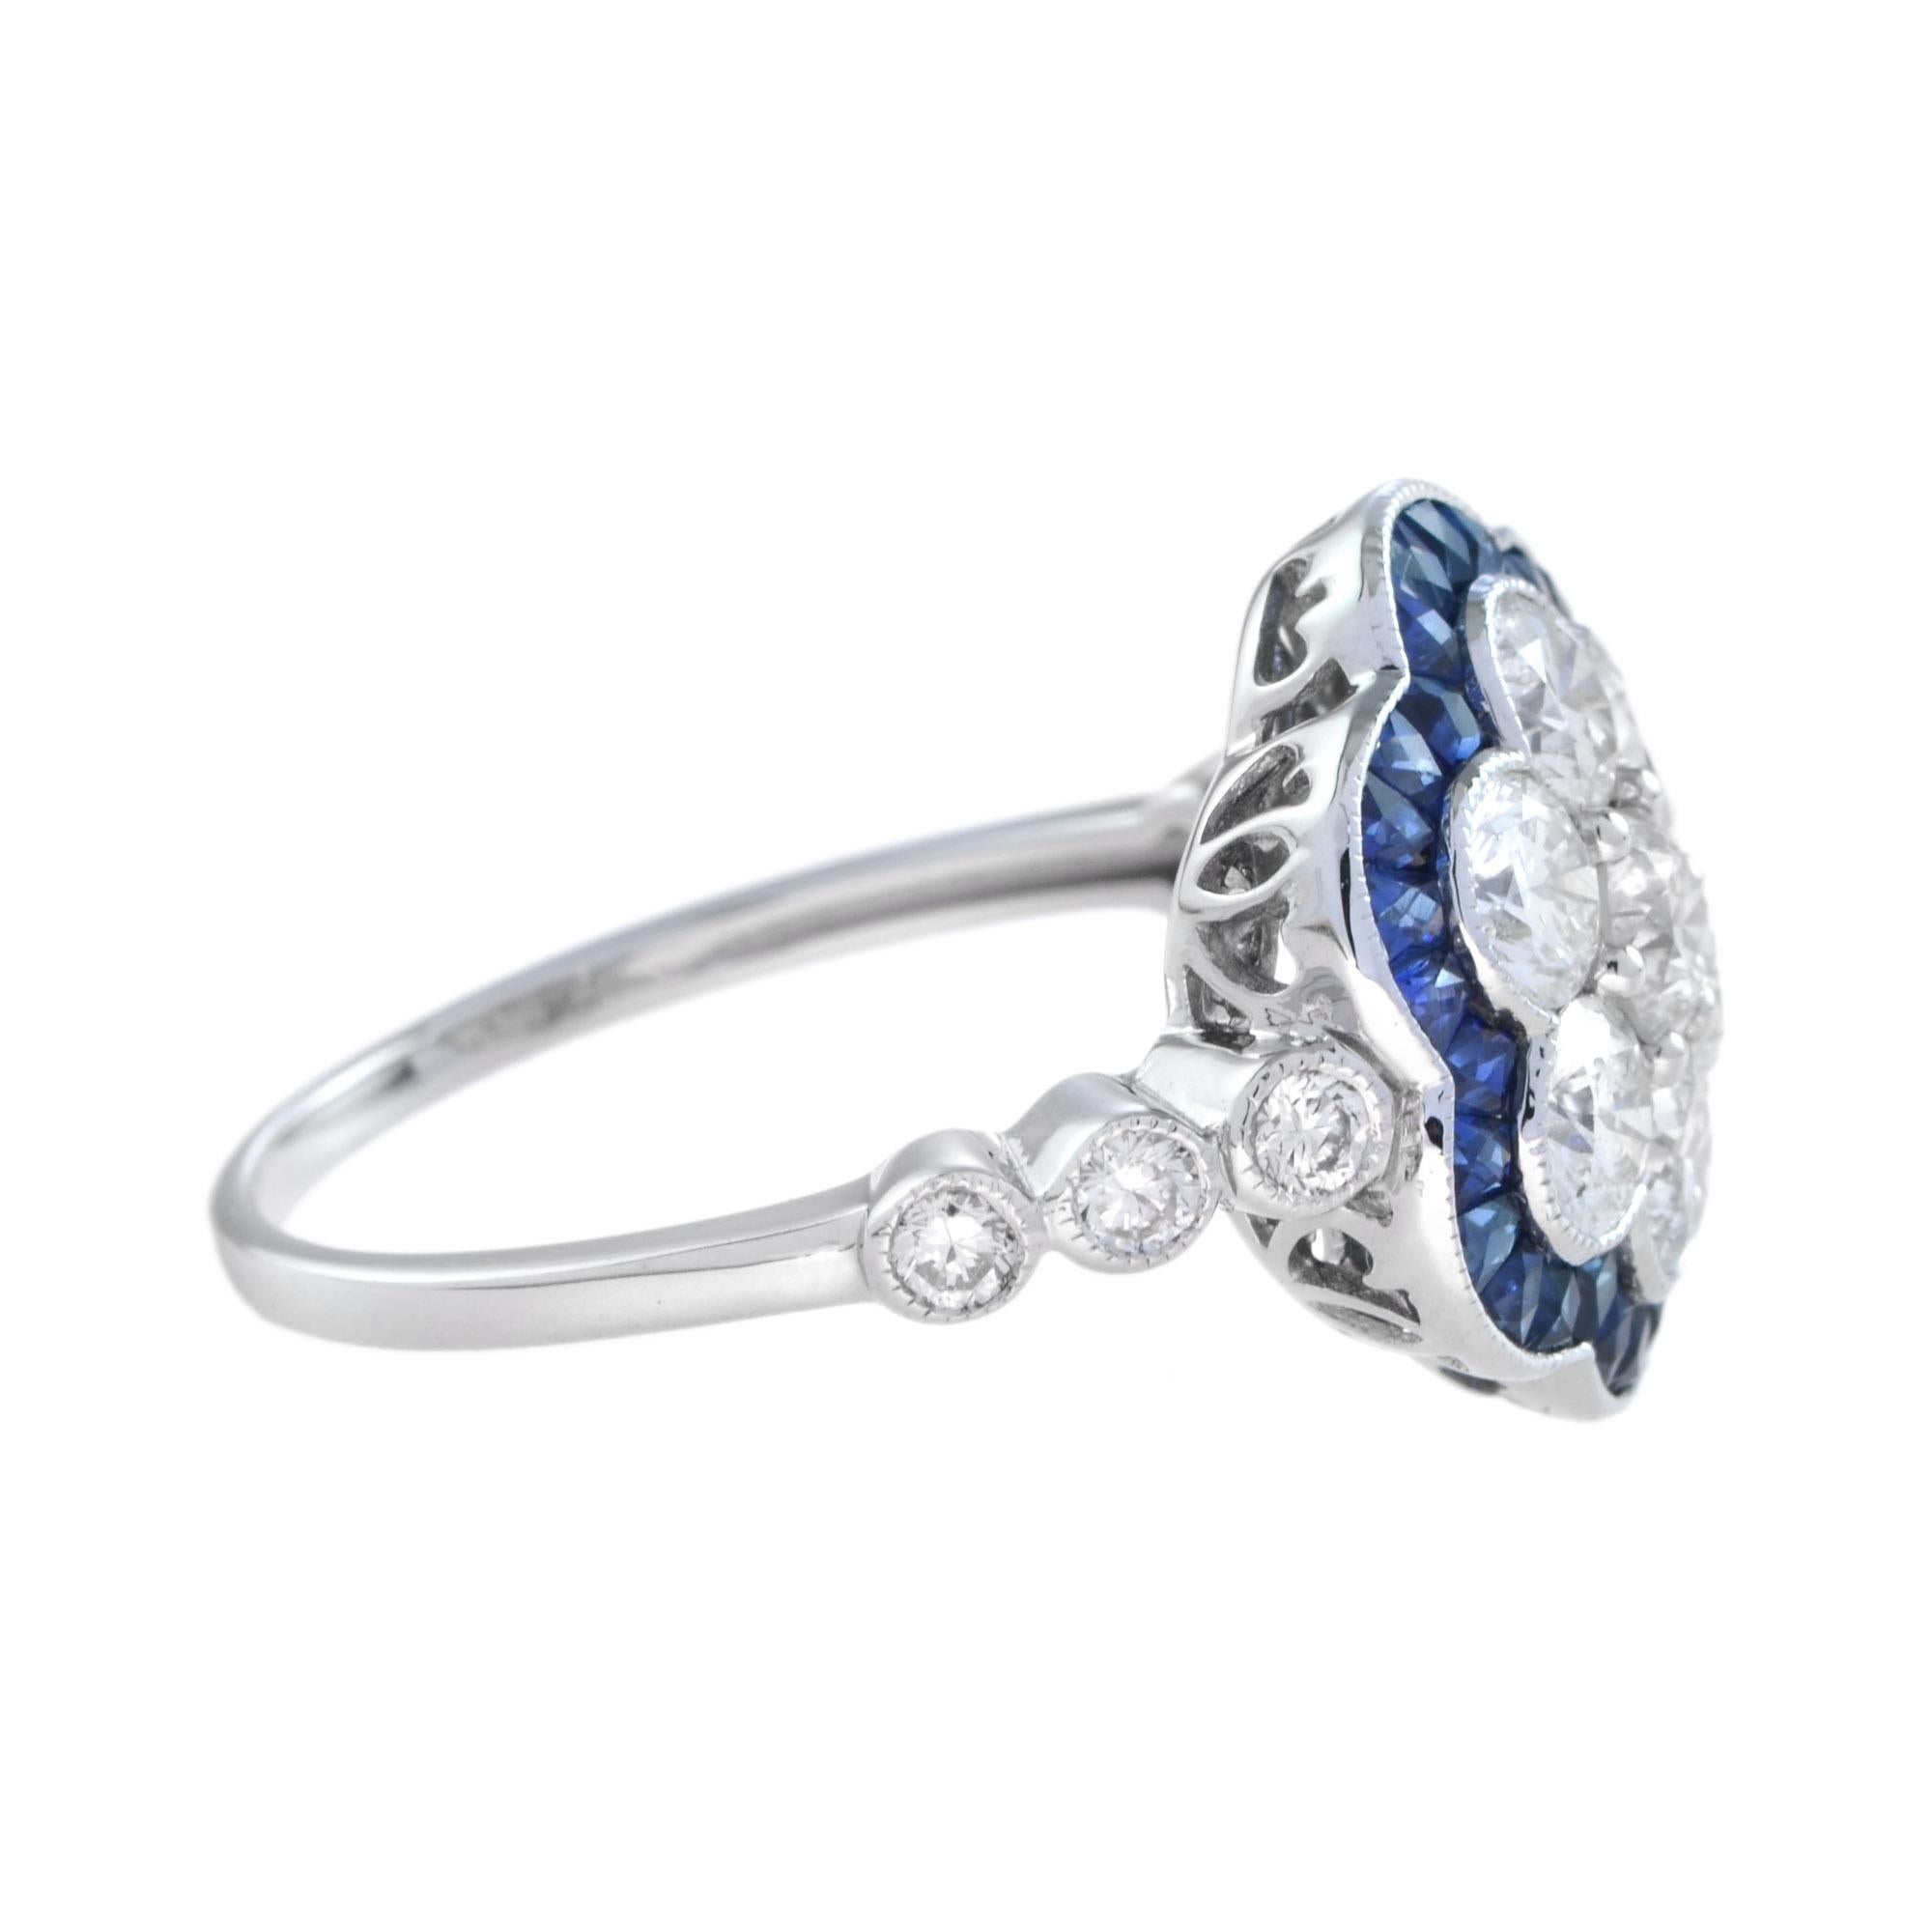 Round Cut Art Deco Style Diamond and Sapphire Cluster Ring in 18K White Gold